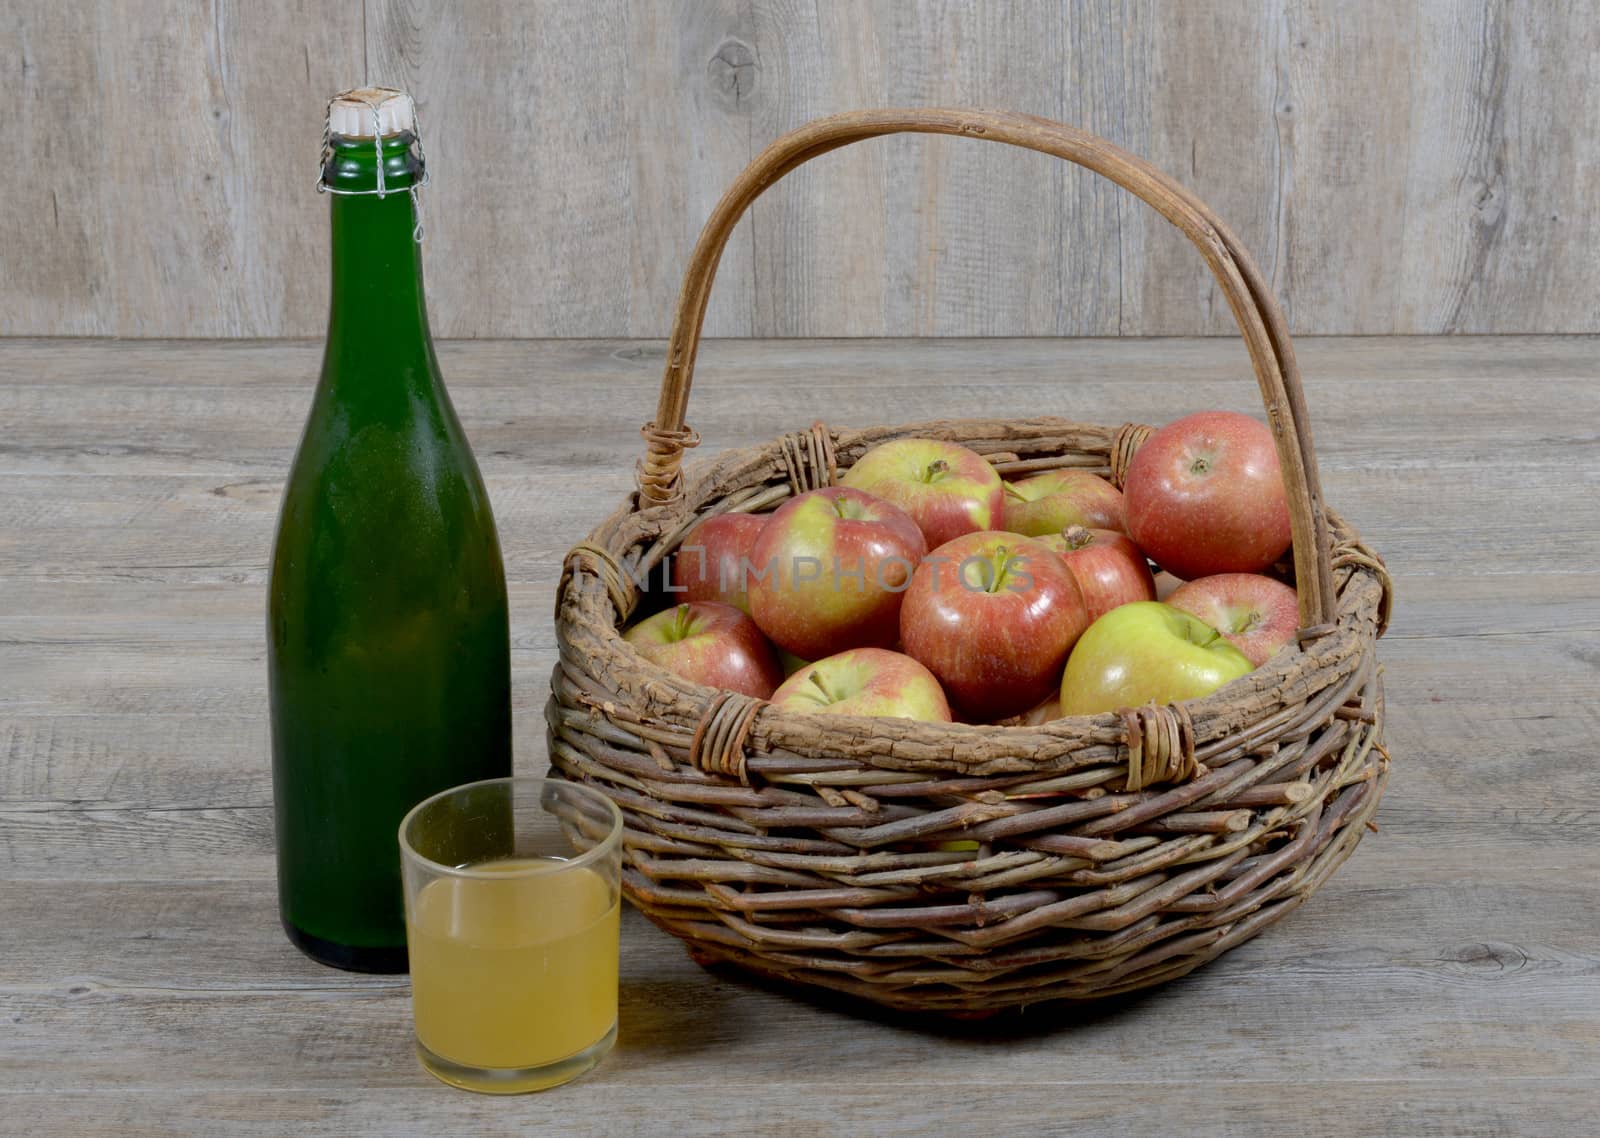 Apple basket and bottle with a glass cider by philipimage